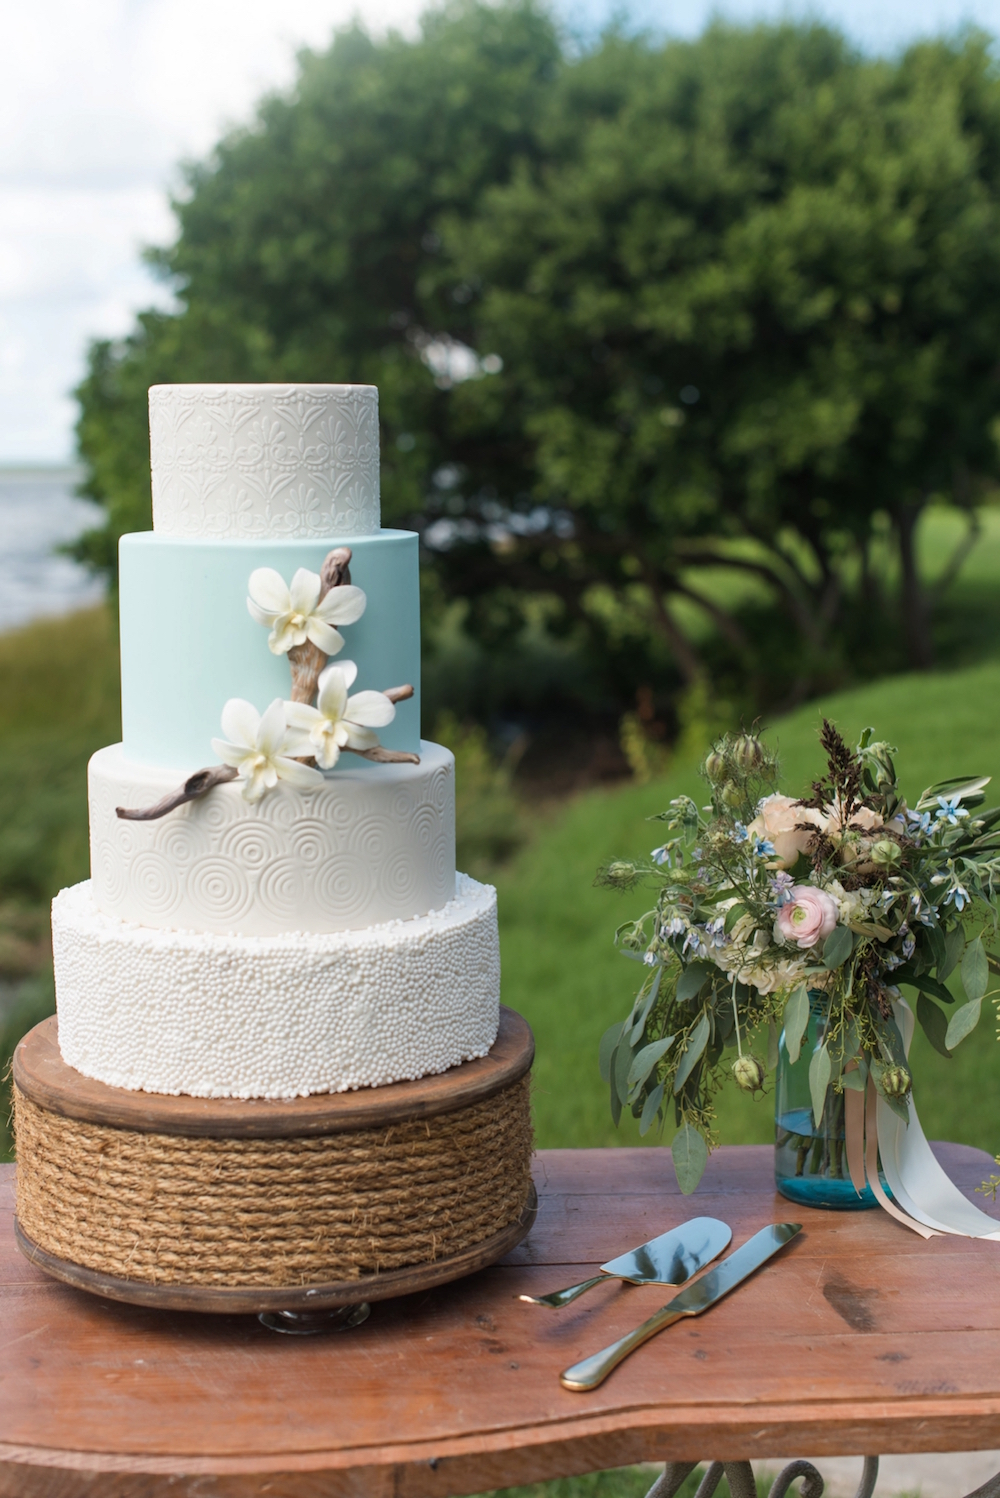  Coastal Chic Inspired Wedding Cake / photo by Caroline &amp; Evan Photography / cake by Hands on Sweets 